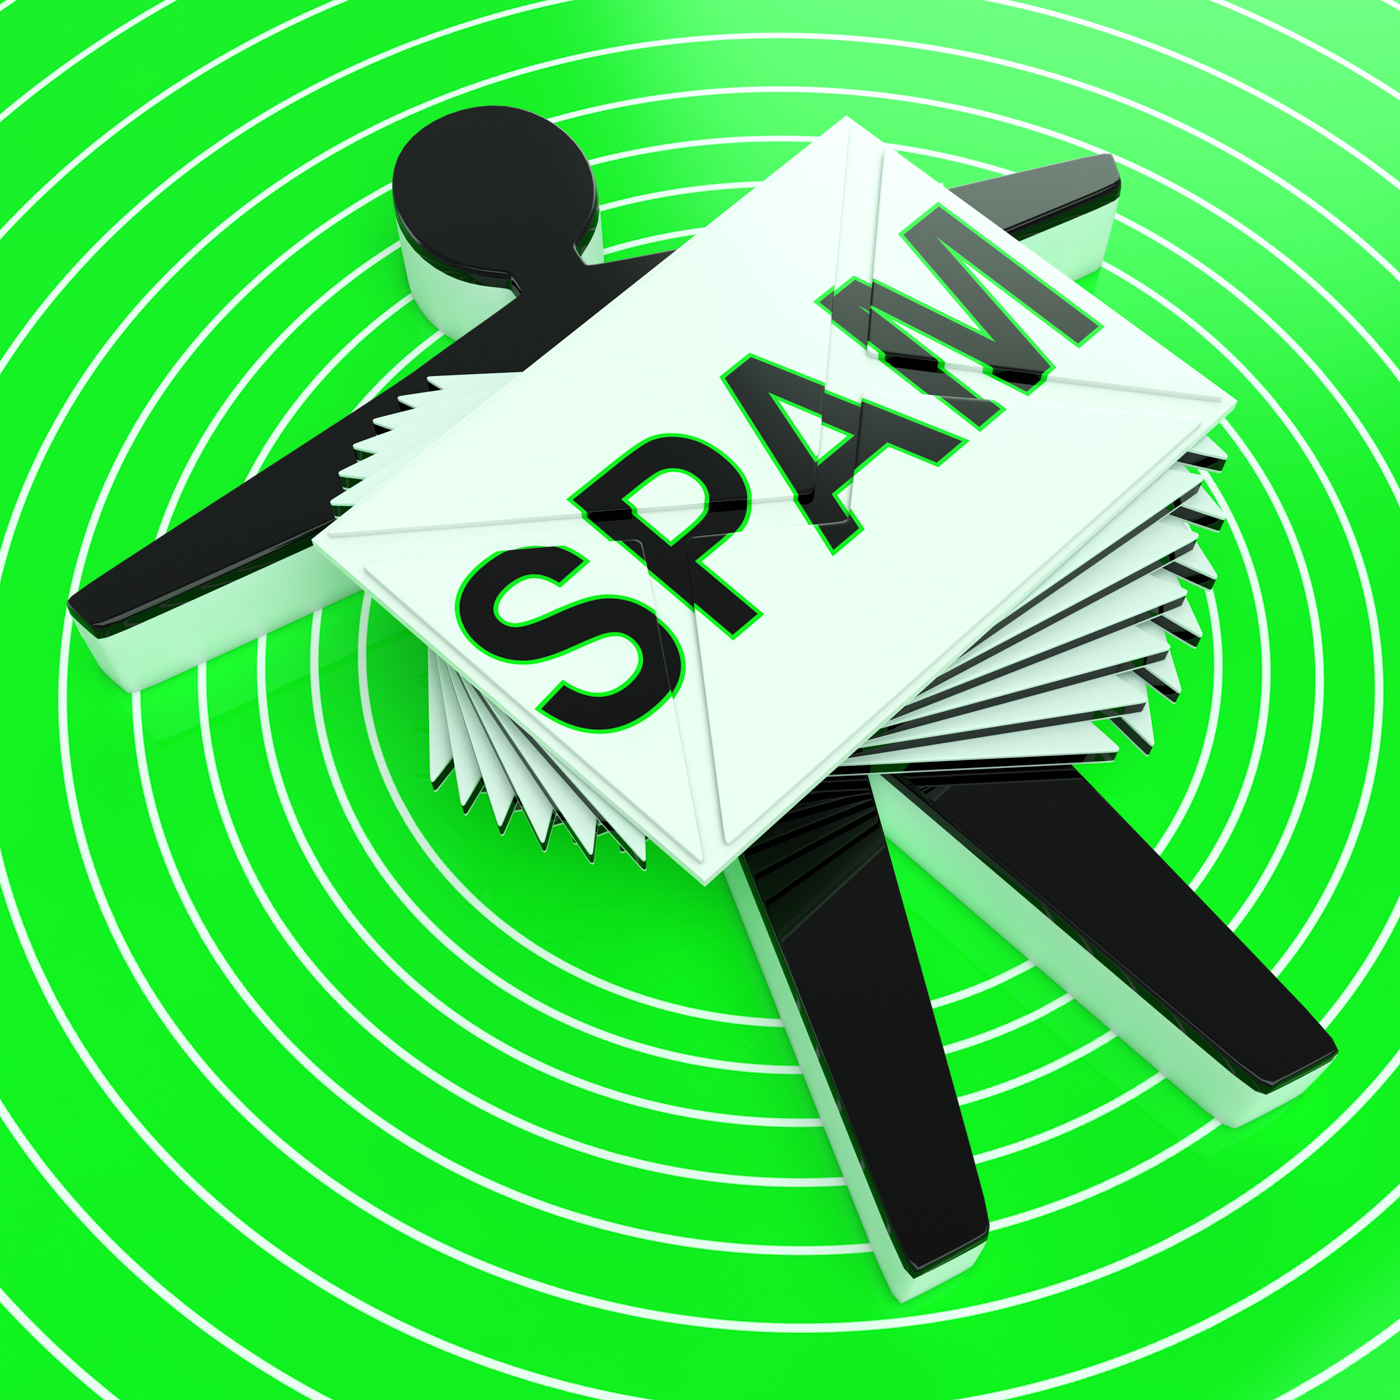 Spam target shows junk unsolicited unwanted e-mail photo